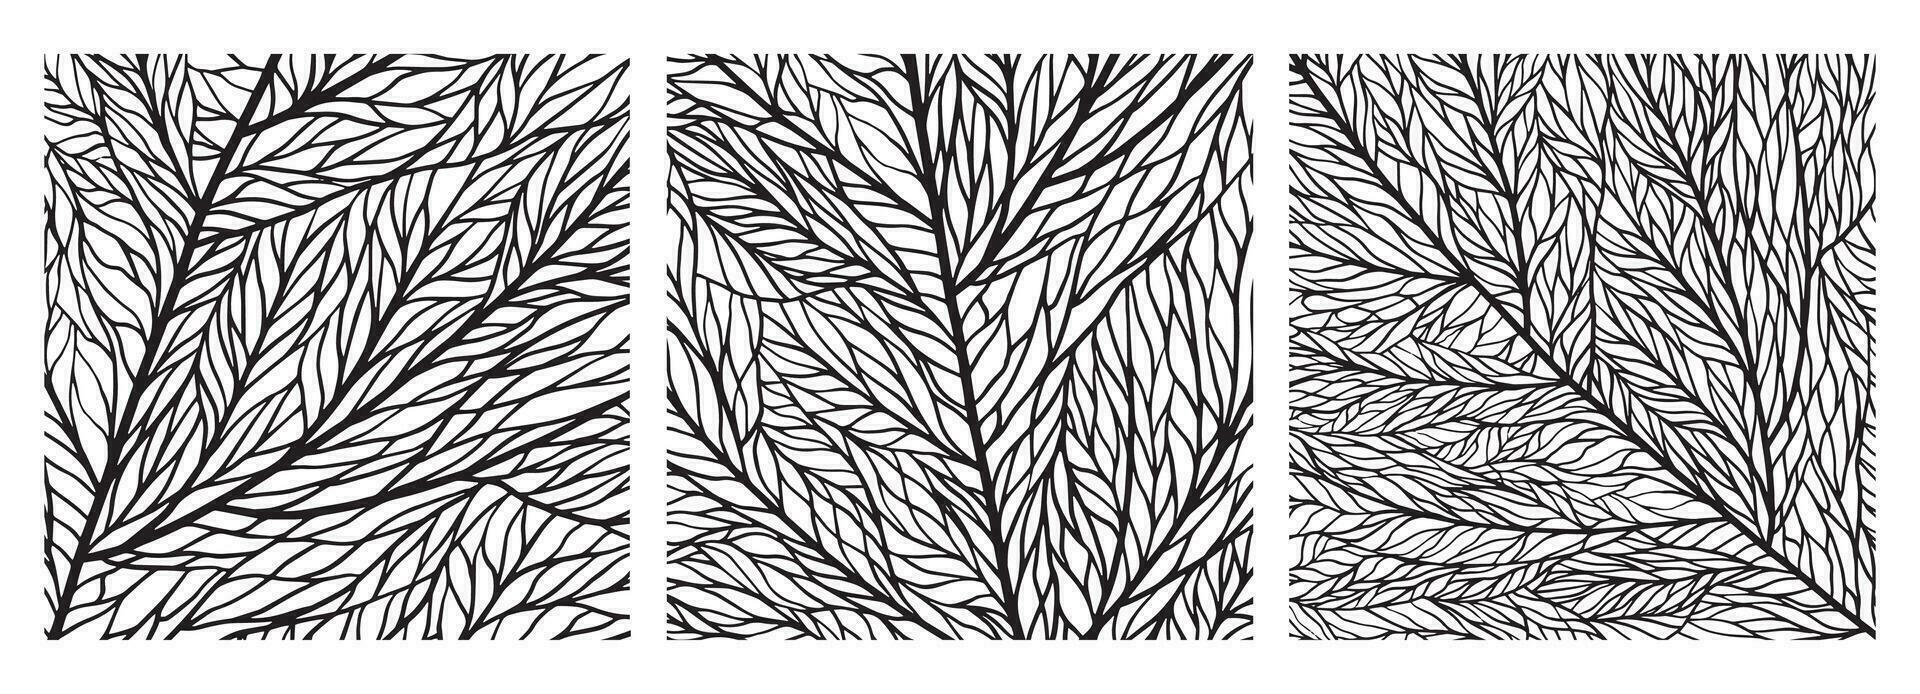 Set of leaf textures with veins and cells. Black and white close up leaf pattern. Leaf structure. Mosaic ornament of macro texture of plants vector